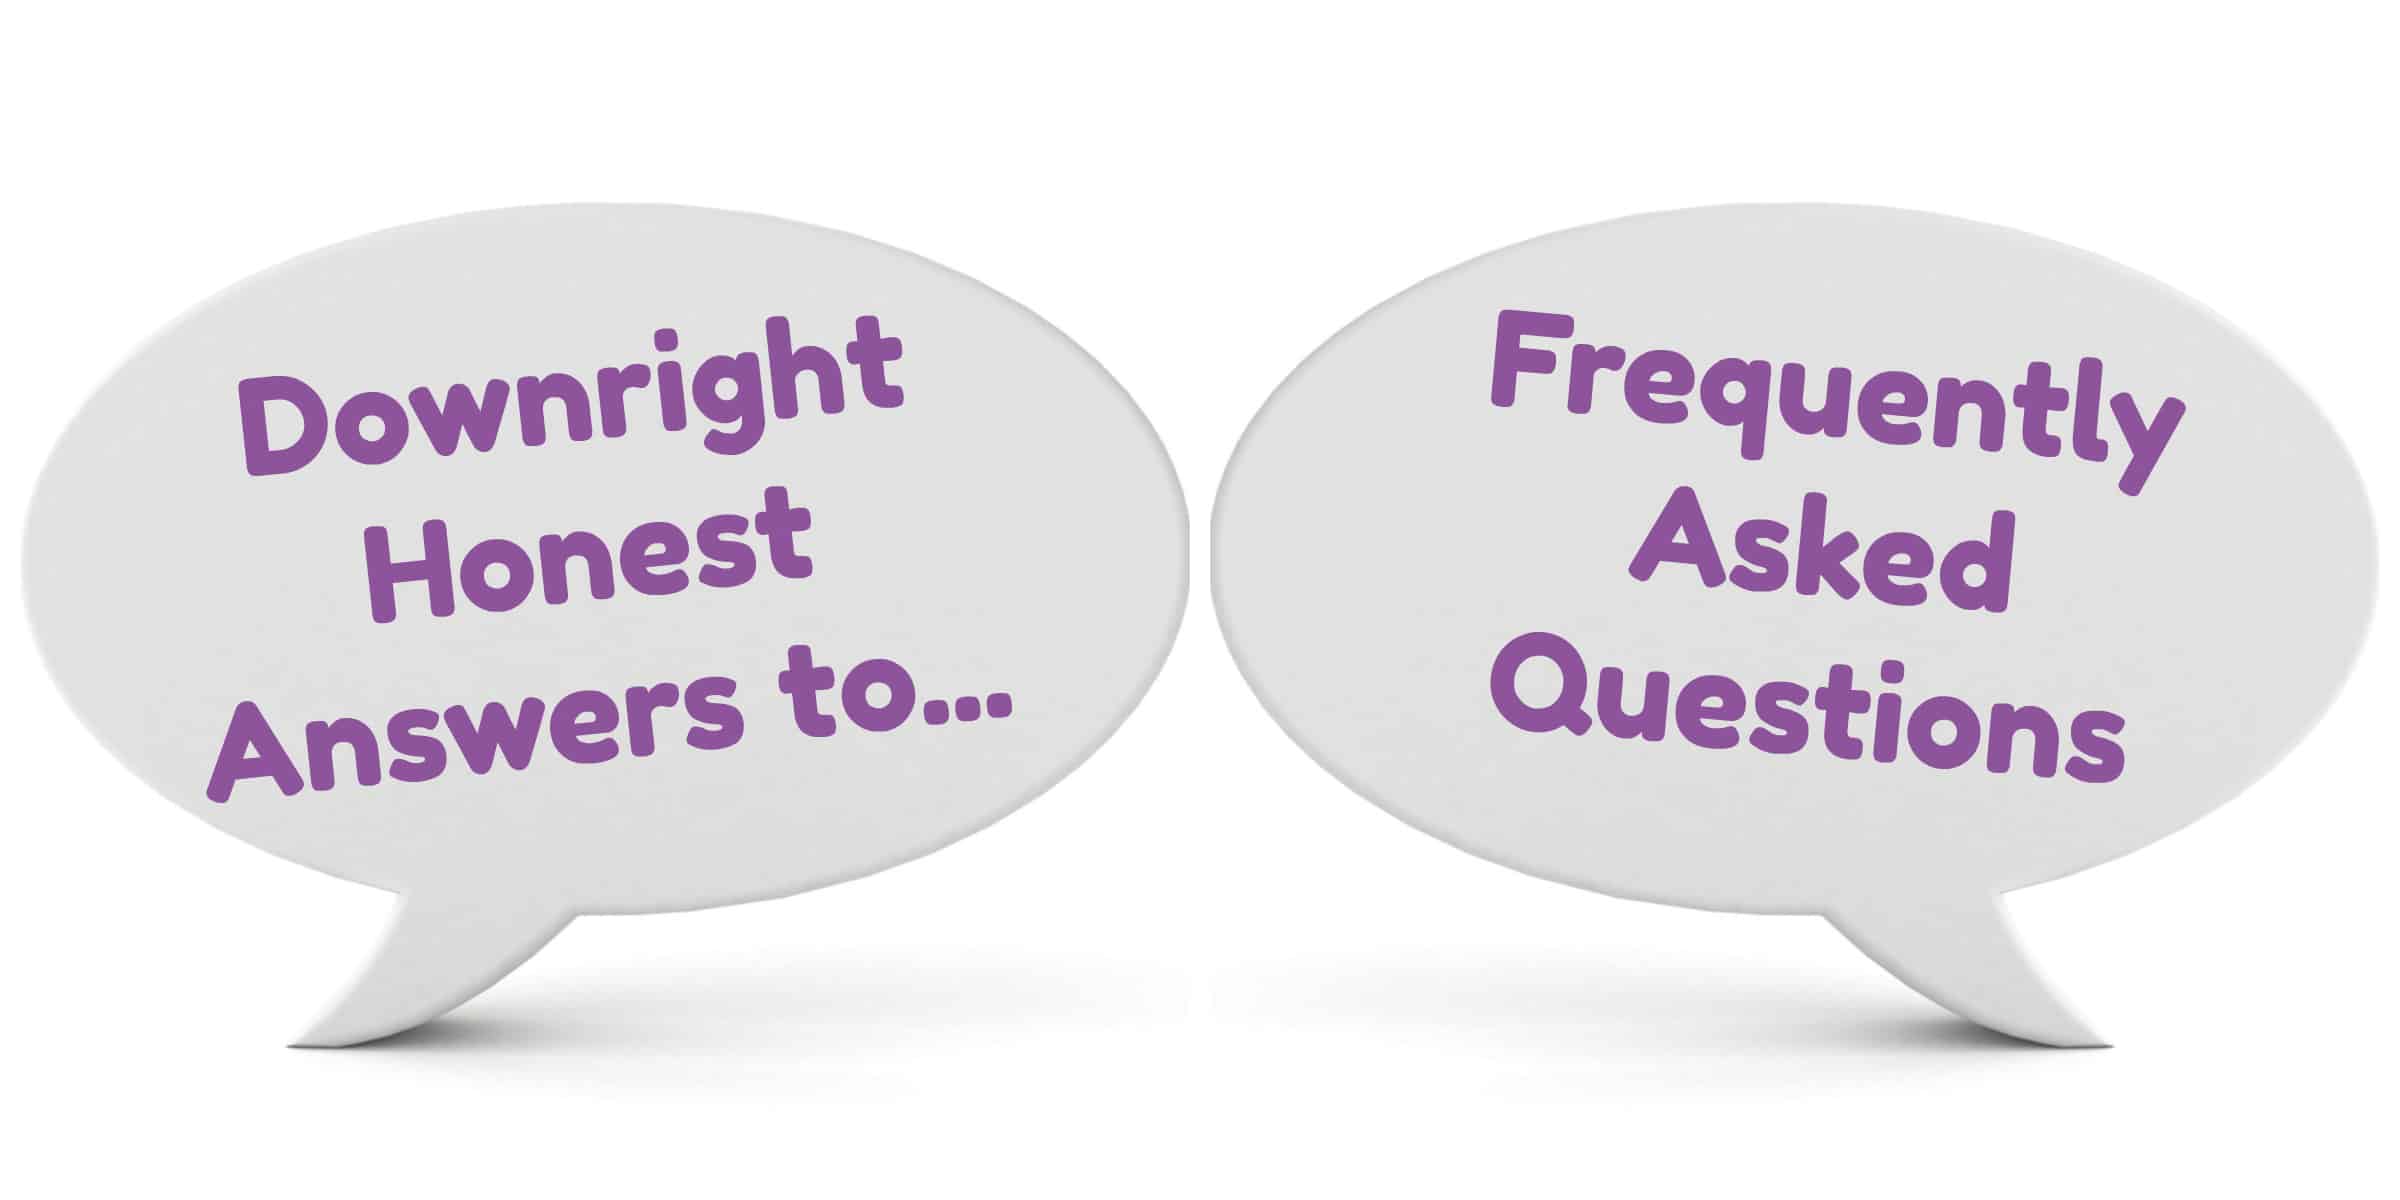 Downright Honest Answers to Frequently Asked Questions